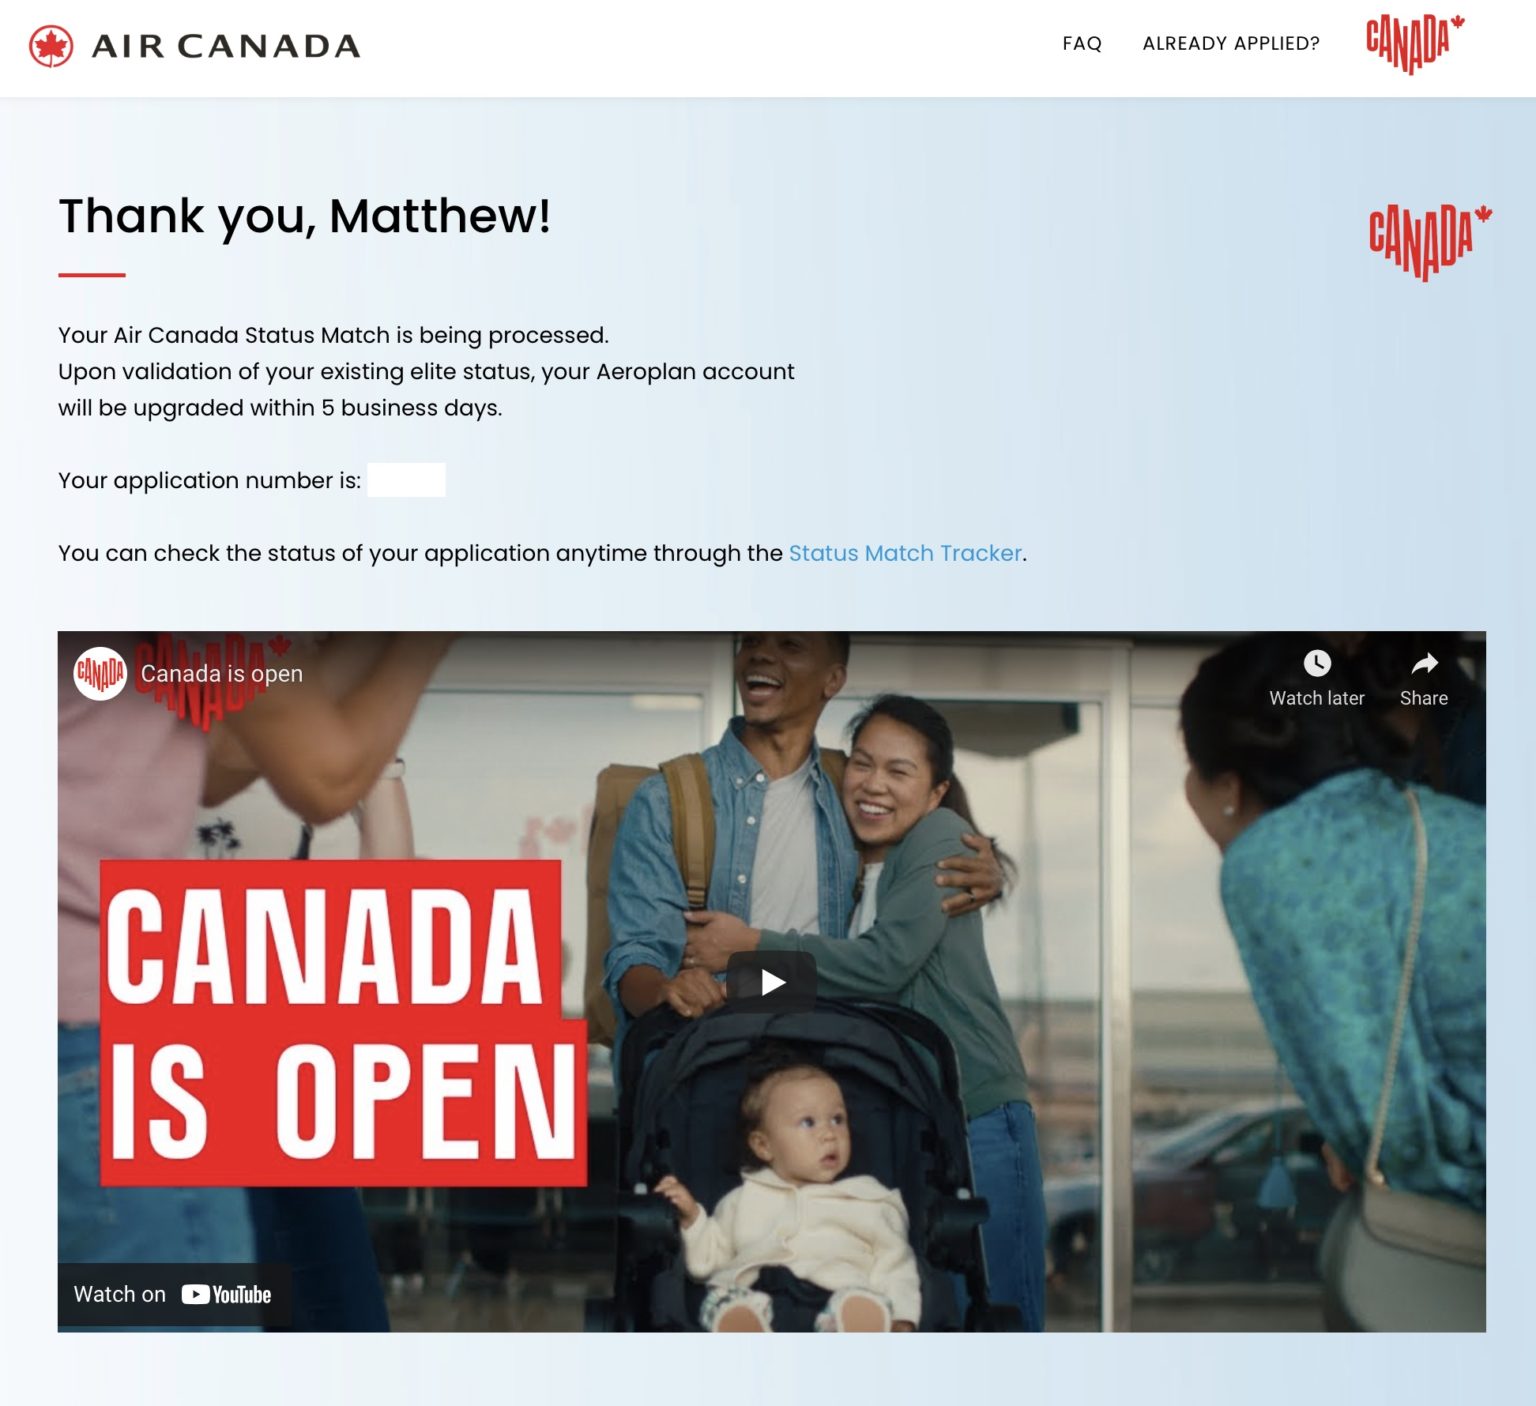 Denied Twice For Air Canada Status Match, Then Success Live and Let's Fly